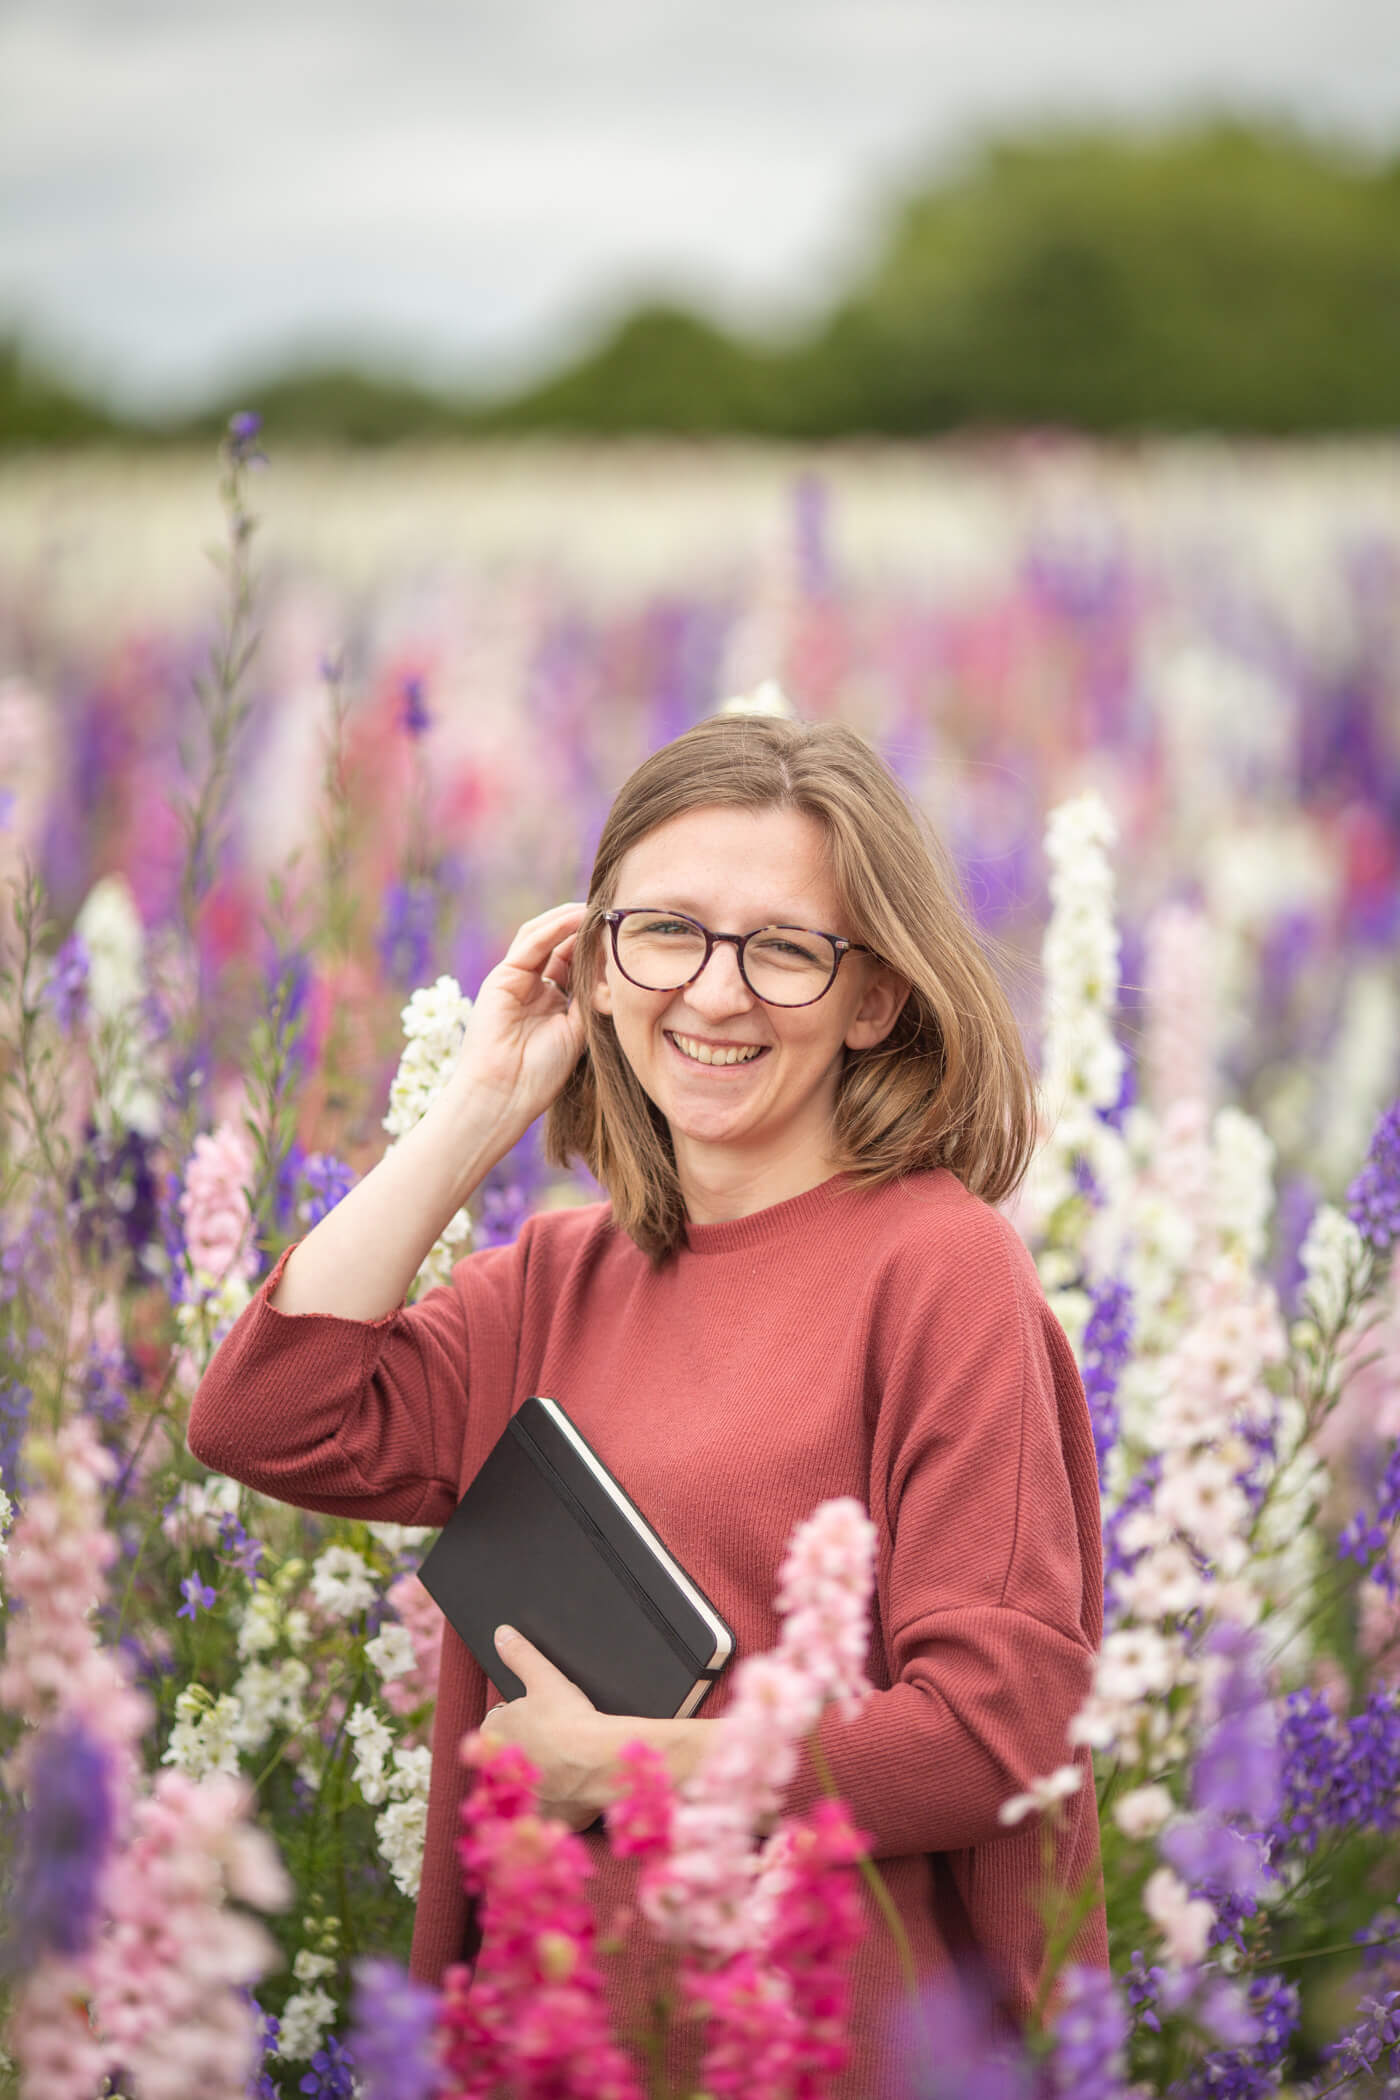 Jess stood in a field of wildflowers holding a black notebook